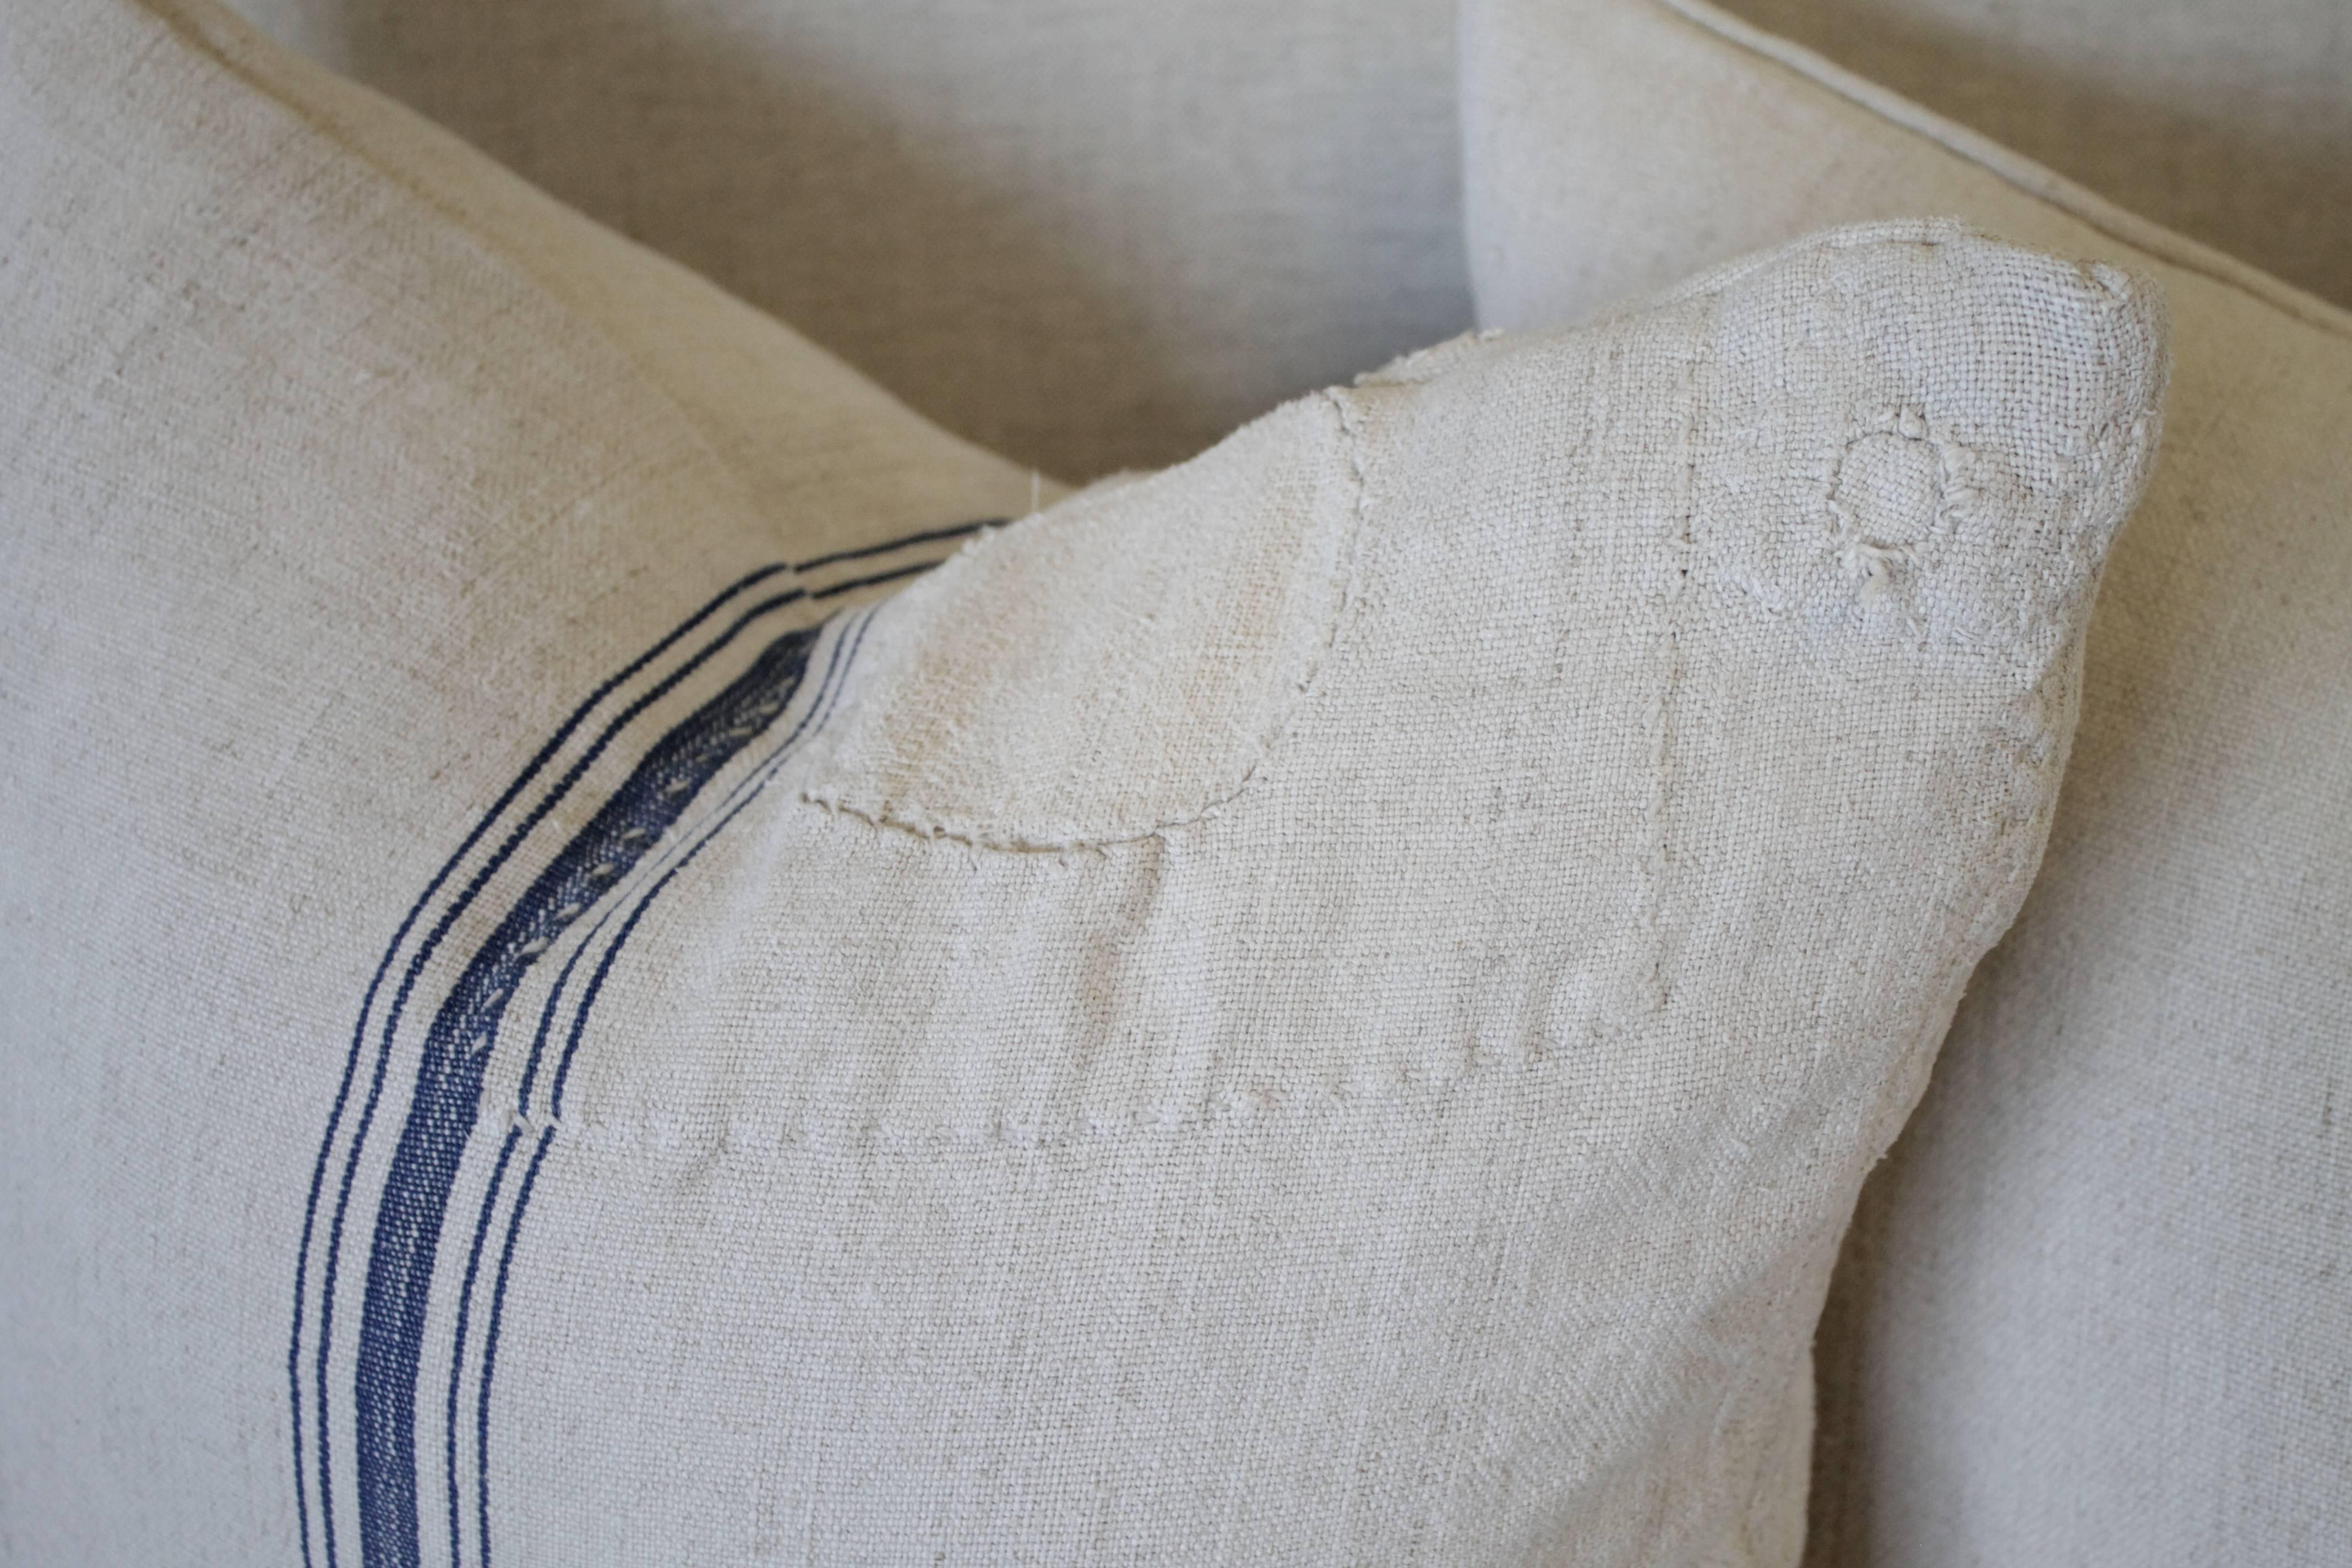 We make these pillows from old grain sacks from Eastern Europe. The pair have a deep blue triple stripe down the center, and the body is a medium oatmeal color. They are sewn with a zipper closure, and since we prewash all our vintage fabrics in a